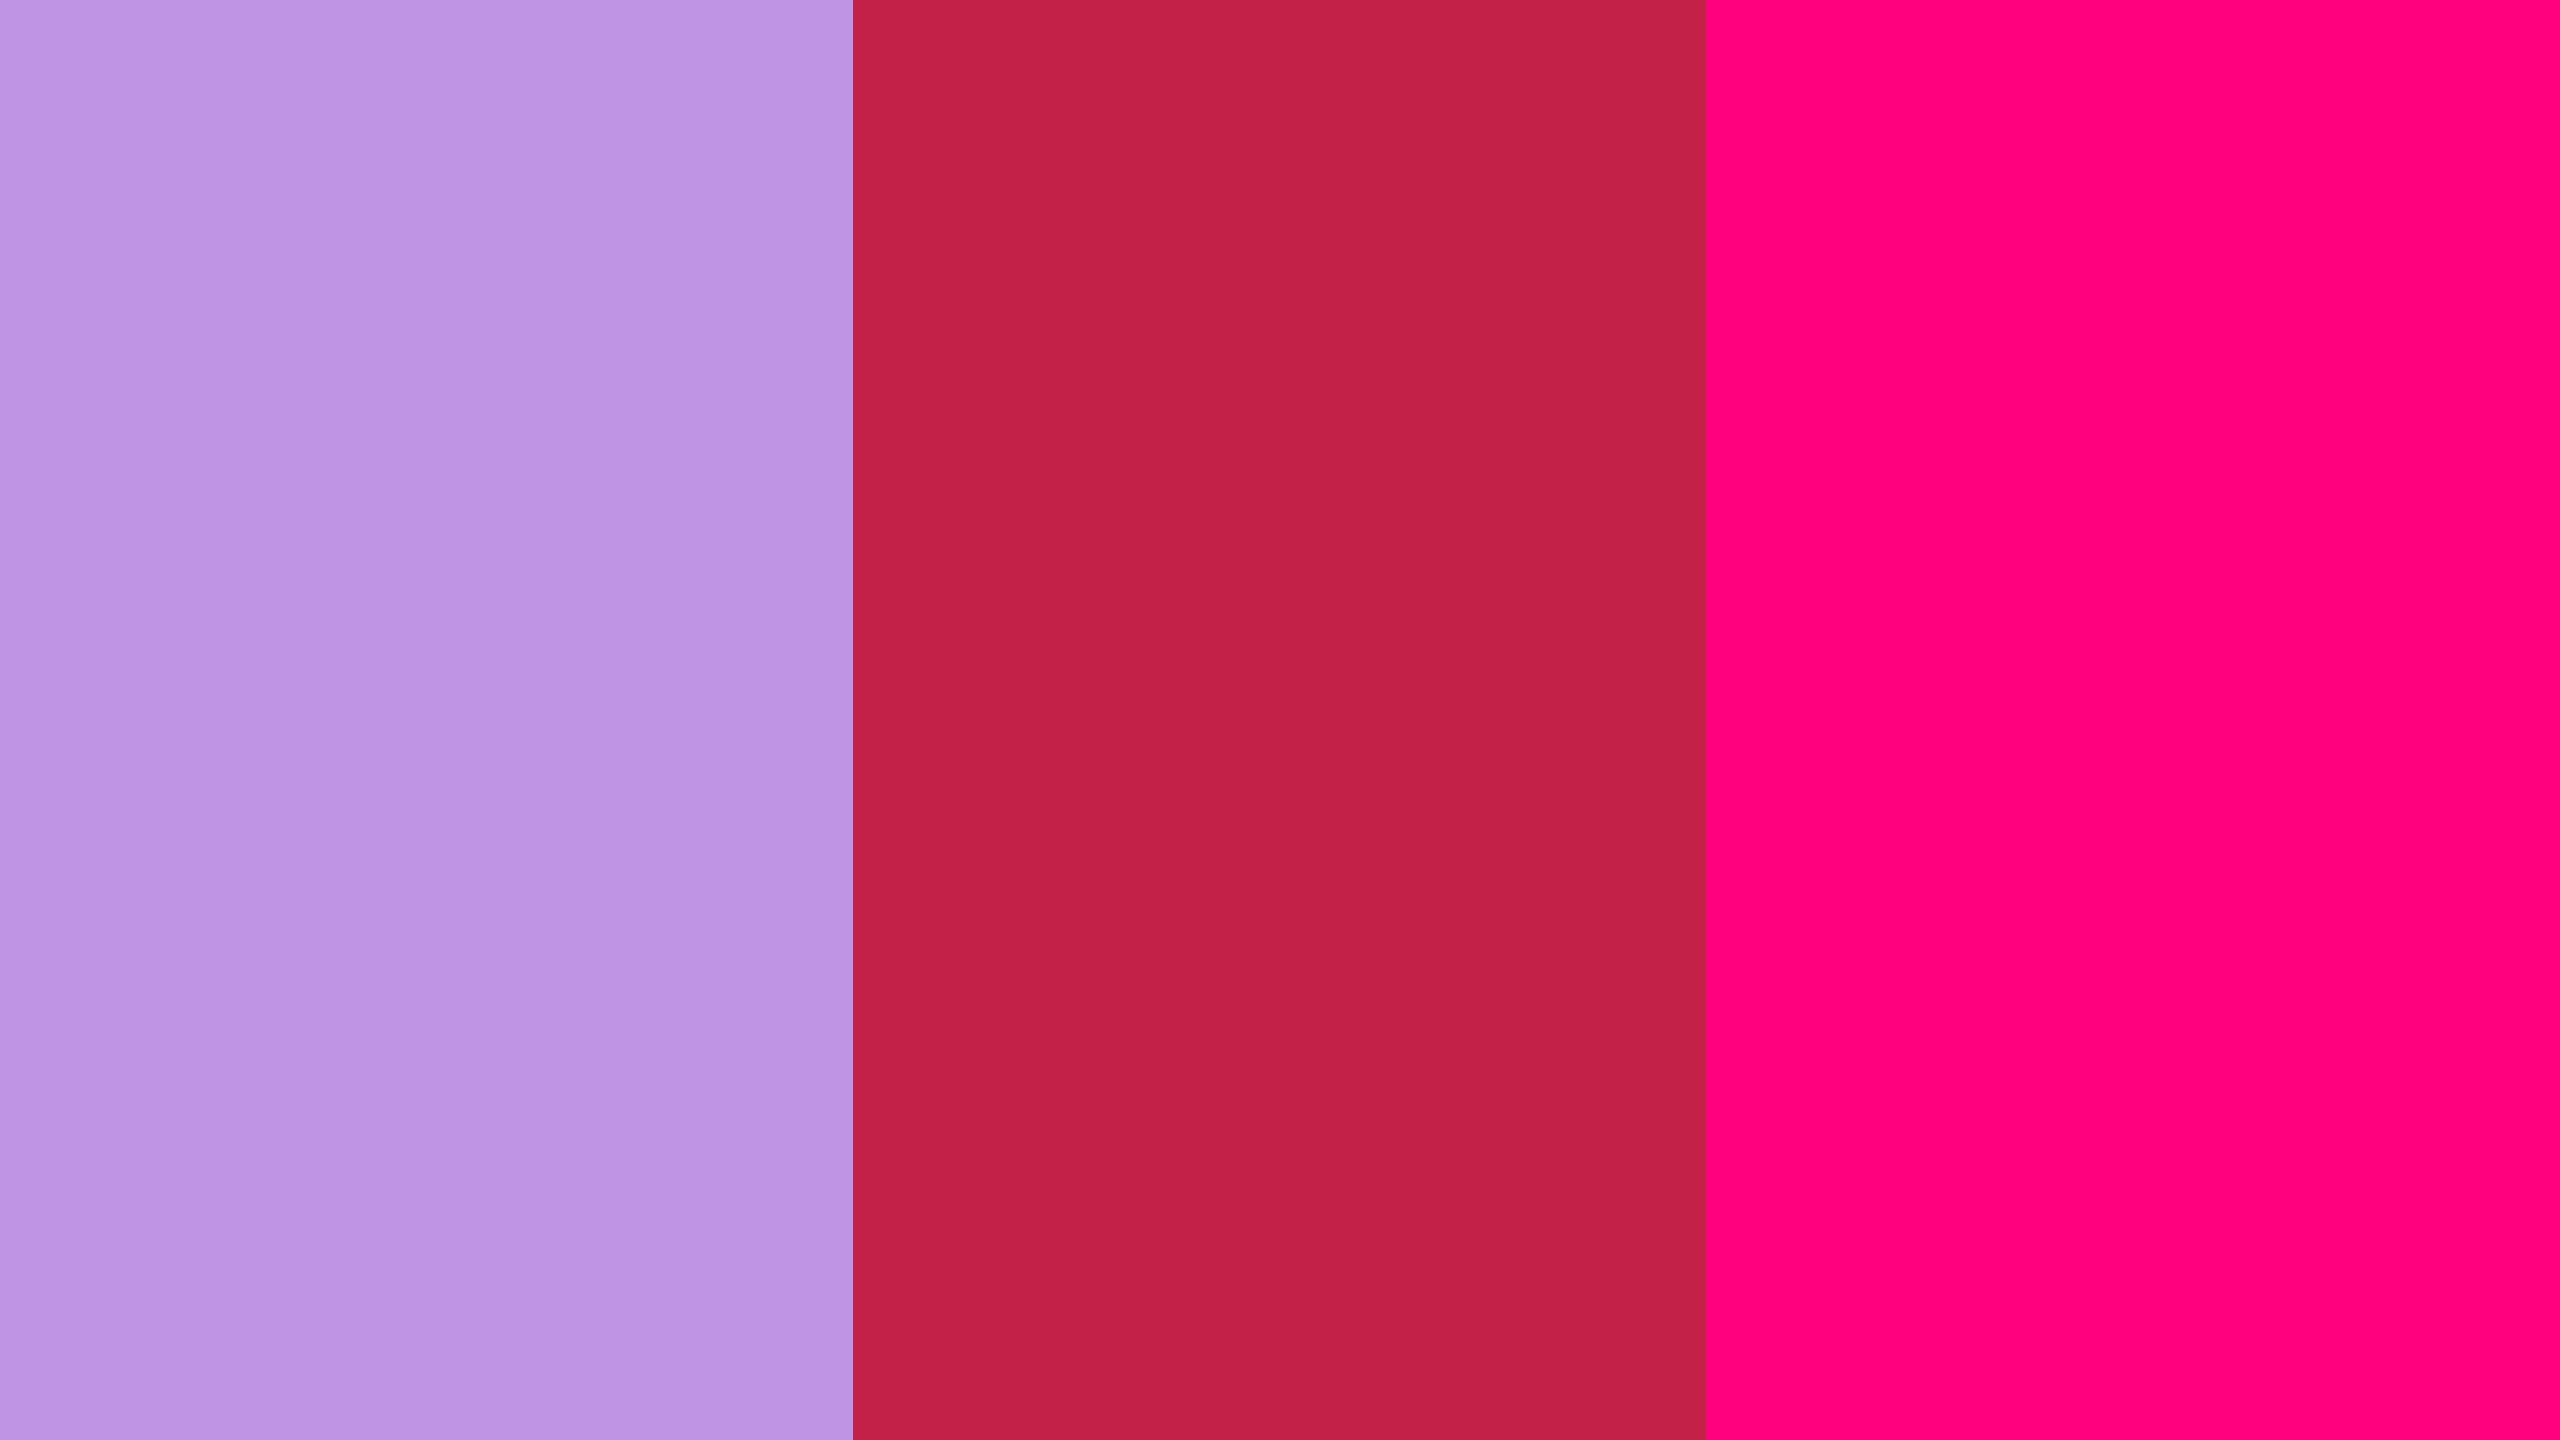 Bright Pink Colored Background Lavender Maroon And